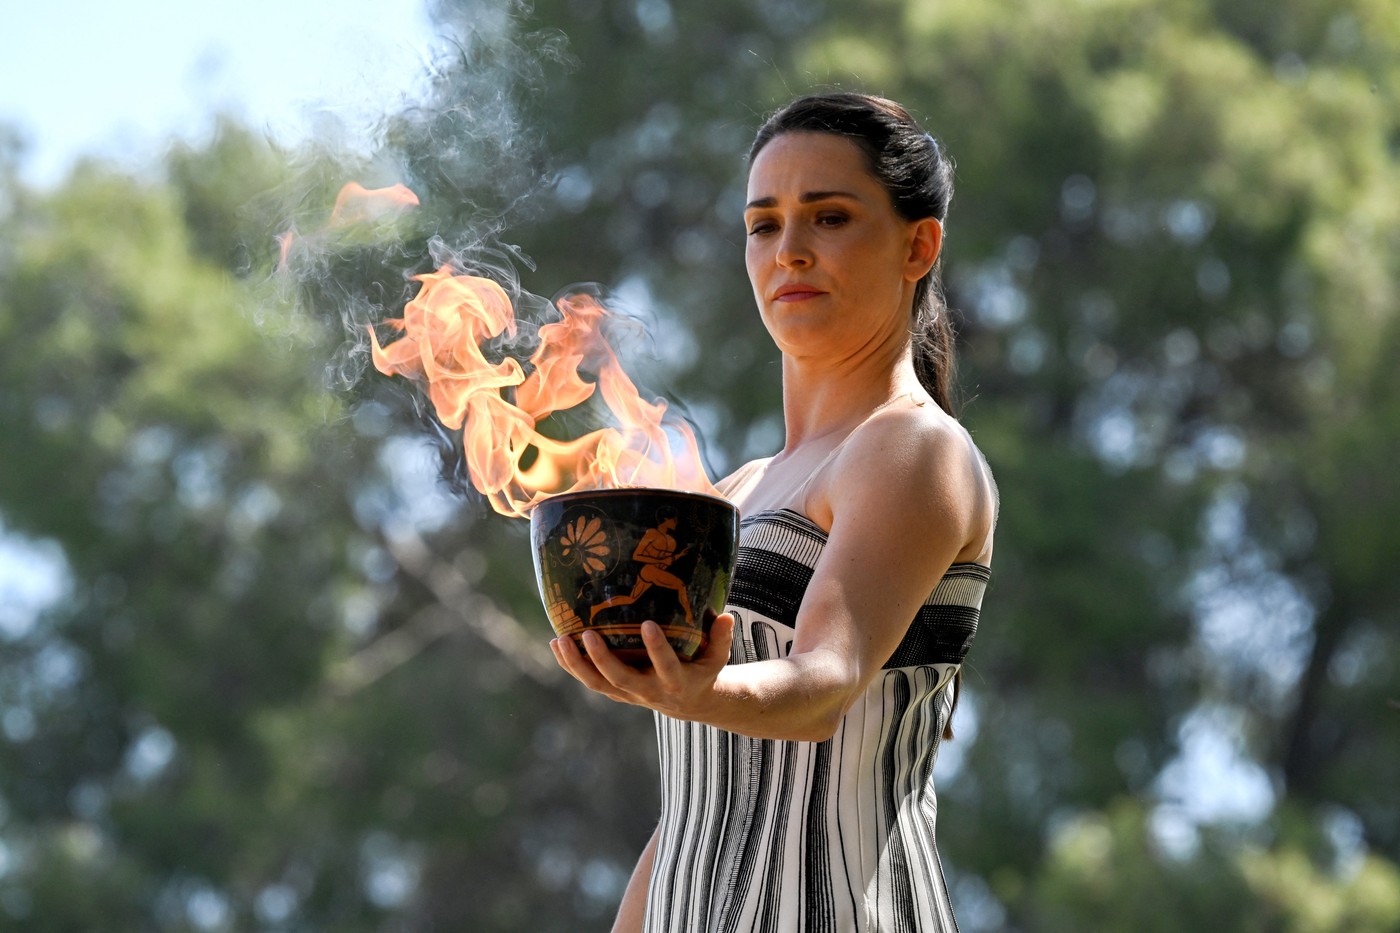 Greek actress Mary Mina, playing the role of the High Priestess, holds the Olympic flame during the rehearsal of the flame lighting ceremony for the Paris 2024 Olympics Games at the ancient temple of Hera on the Olympia archeological site, birthplace of the ancient Olympics in southern Greece, on April 15, 2024.,Image: 864966570, License: Rights-managed, Restrictions: , Model Release: no, Credit line: Aris MESSINIS / AFP / Profimedia